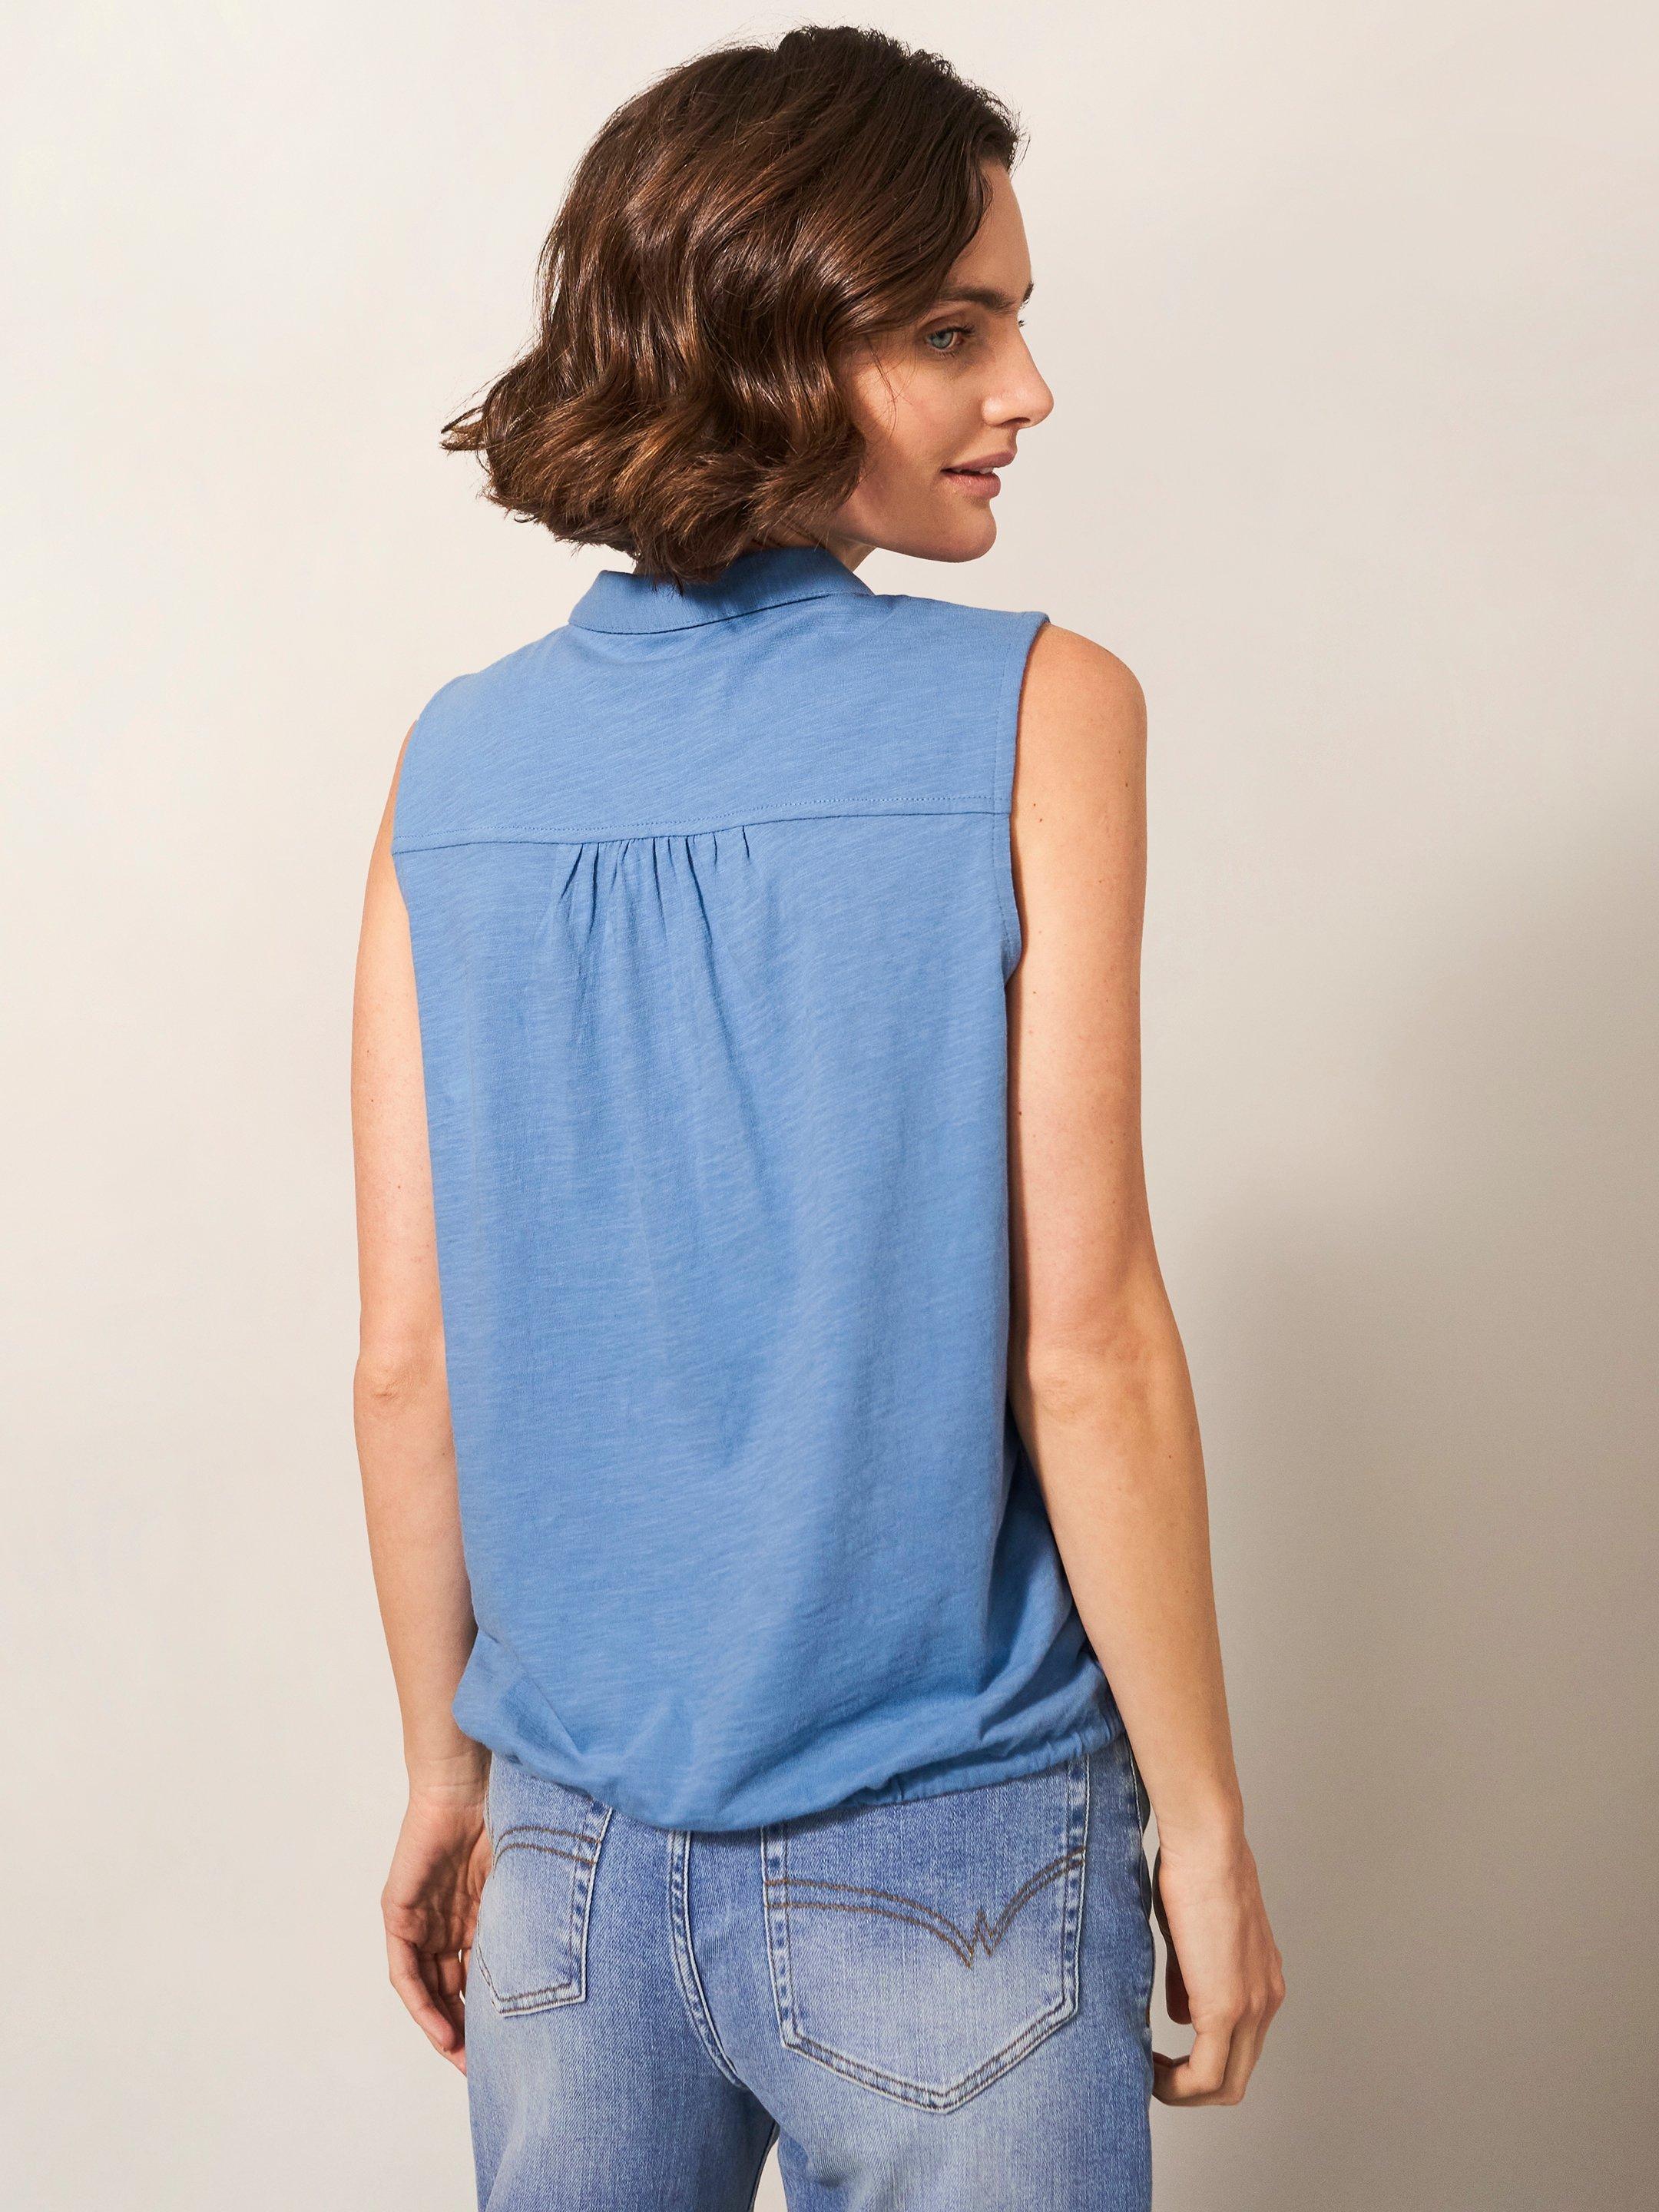 FLOWING GRASSES JERSEY SHIRT in MID BLUE - MODEL BACK